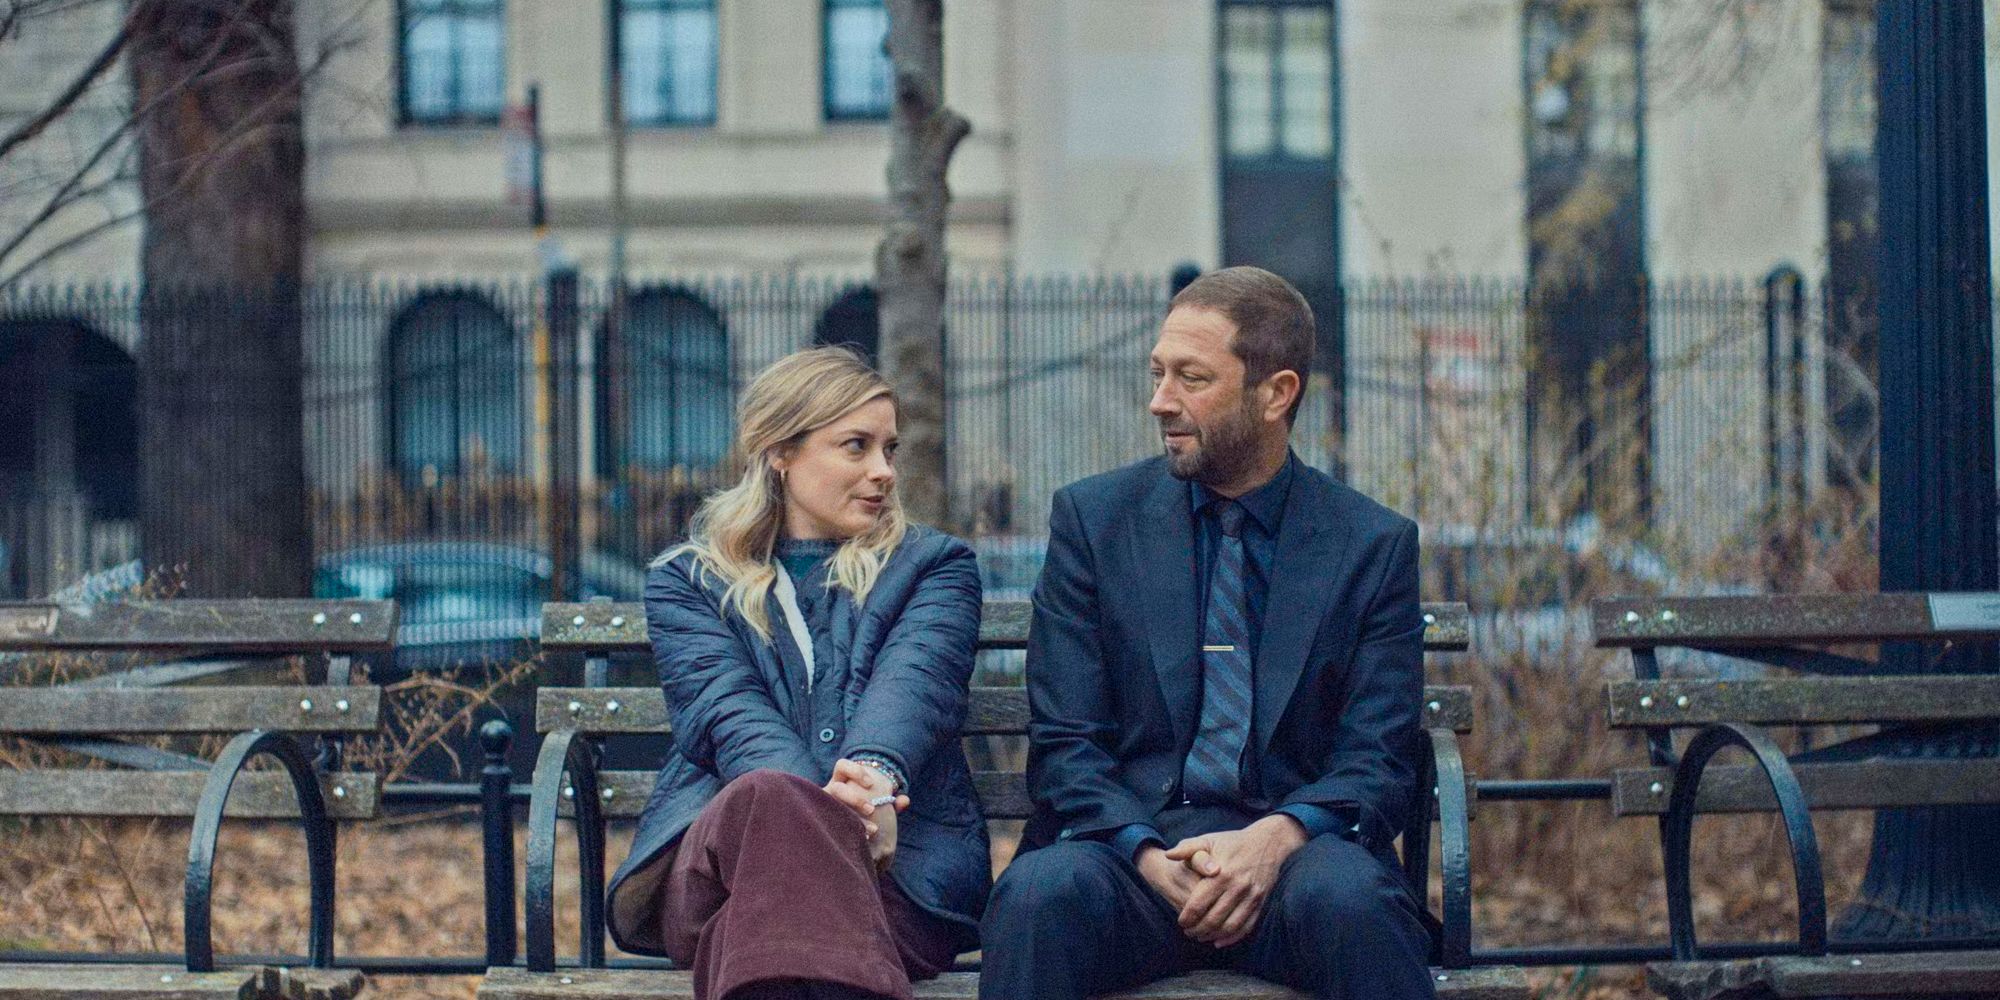 Tiffany (Gillian Jacobs) and Richie (Ebon Moss-Bachrach) having a chat on a bench in the park inThe Bear Season 3 Episode 9